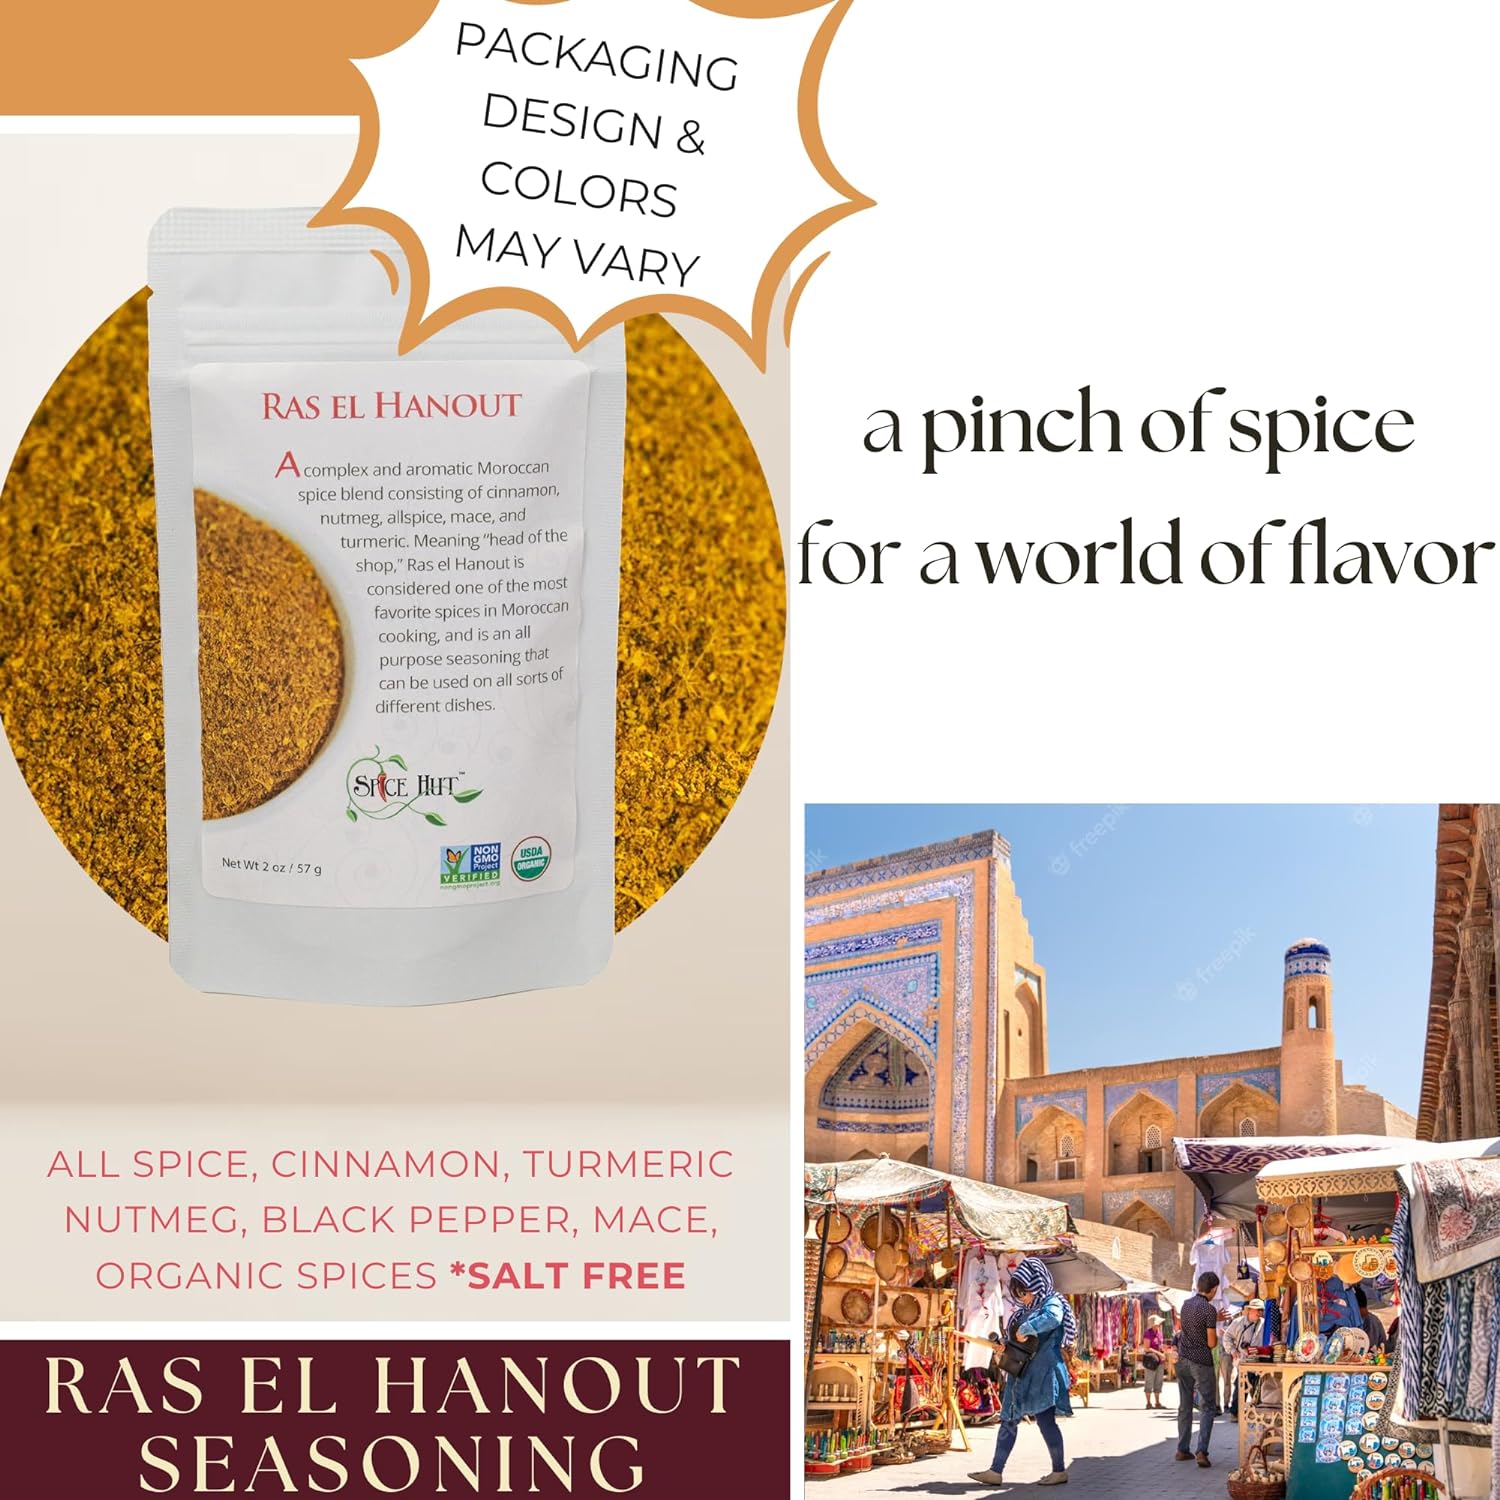 Ras El Hanout Seasoning, Organic Authentic North African Spice Blend, 2 Oz, Salt Free, Small Pouch, The Spice Hut